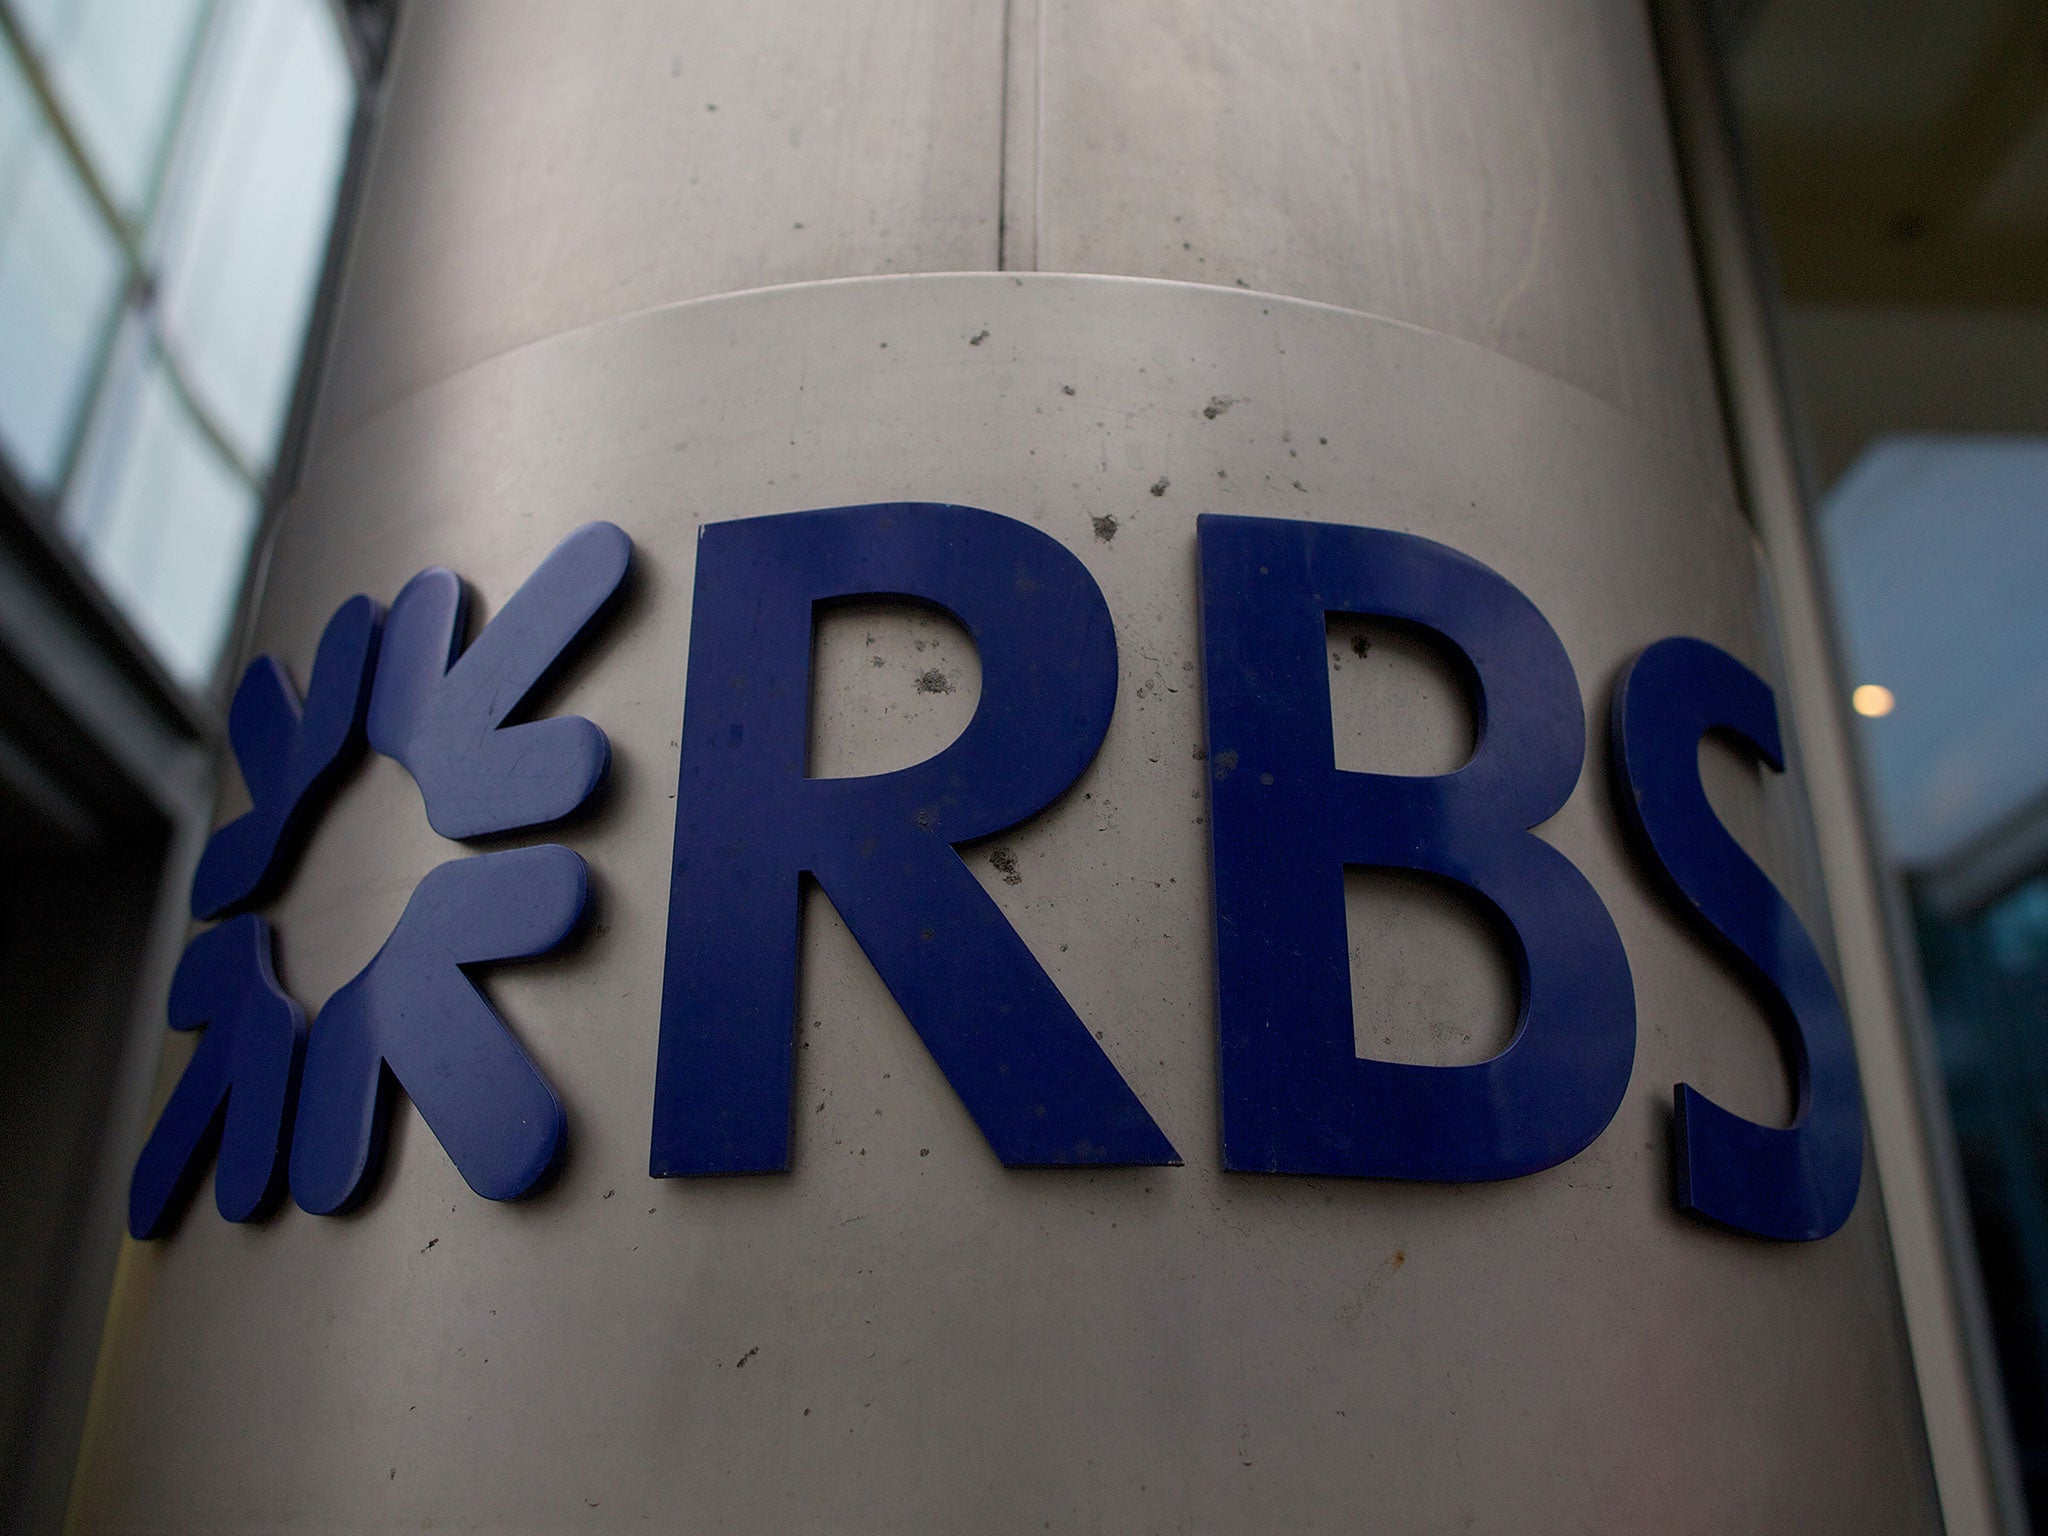 A report into mistreatment of small business customers at the RBS restructuring unit was divulged to the BBC